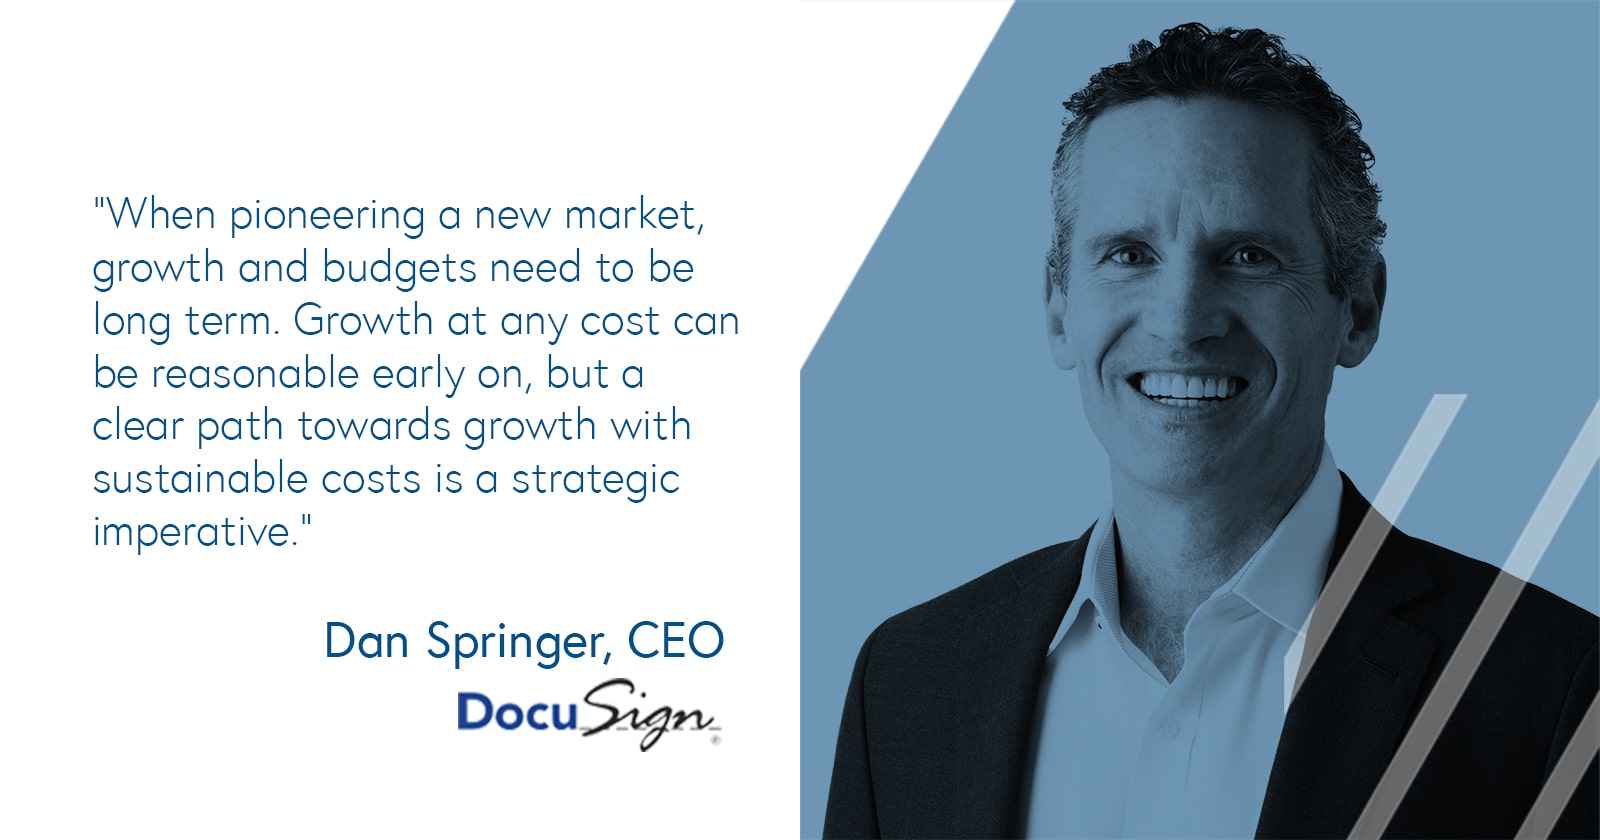 Sustainable business growth according to Dan Springer, CEO of DocuSign